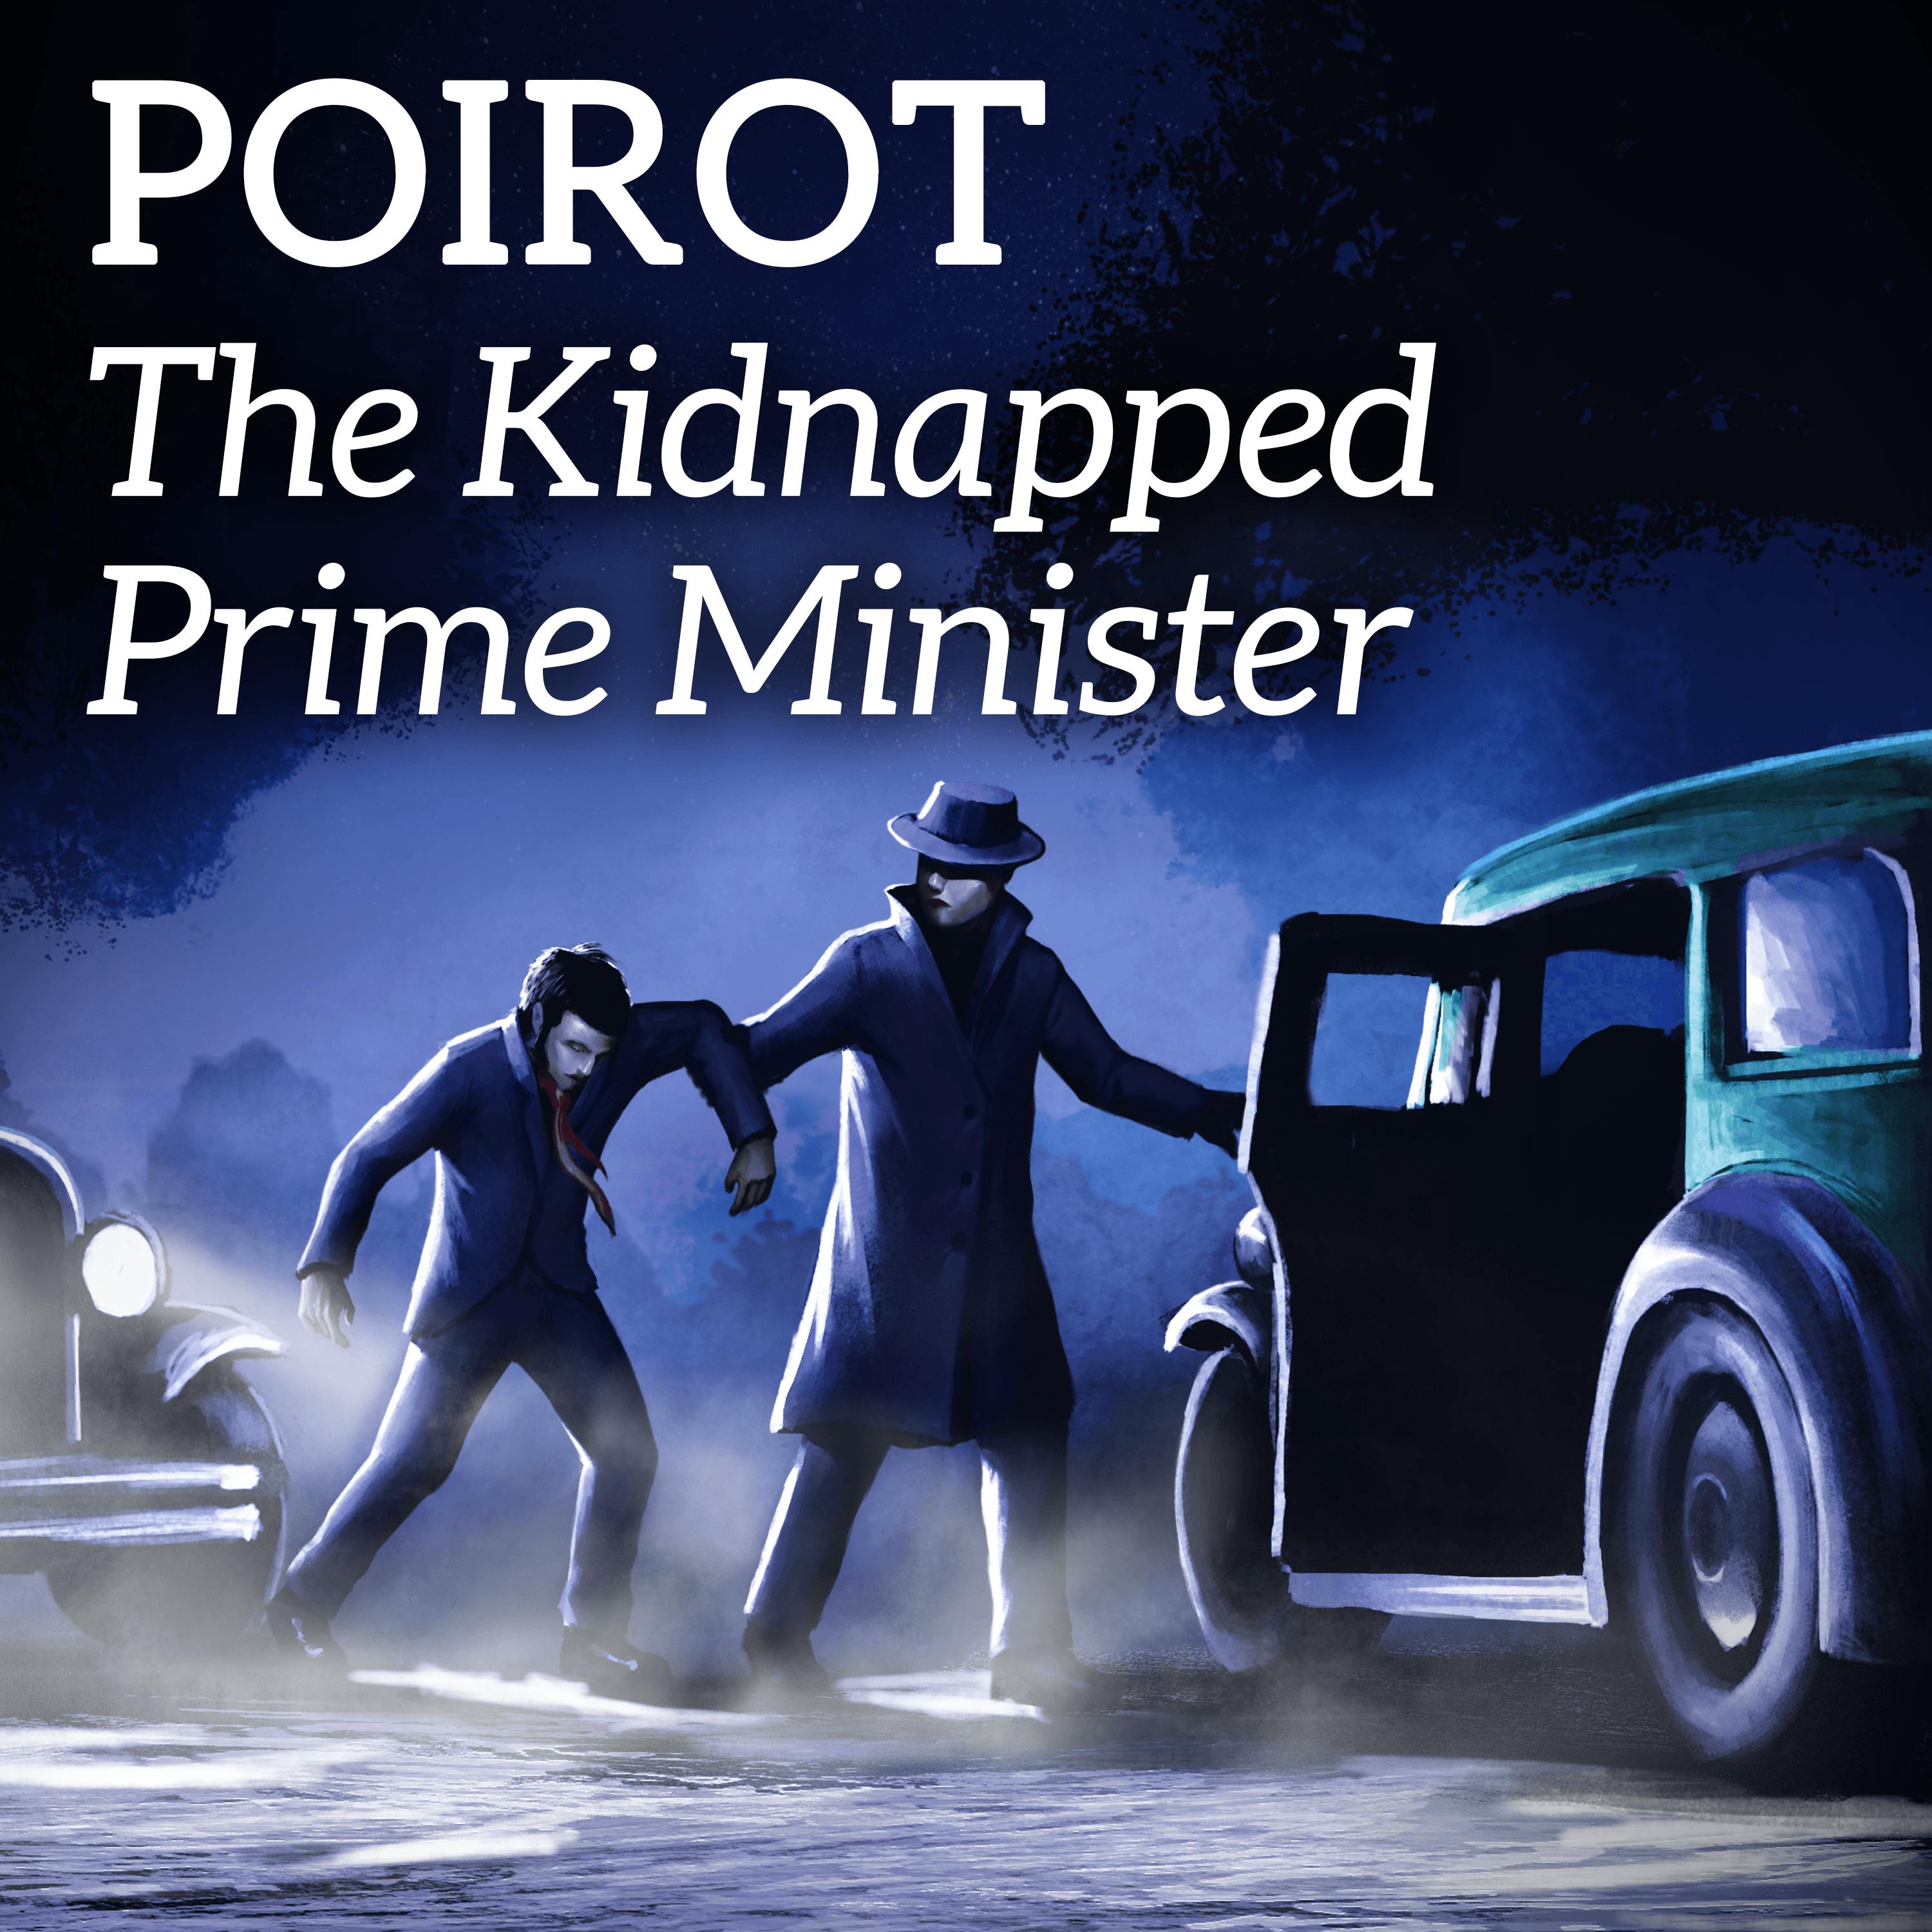 Poirot and The Kidnapped Prime Minister